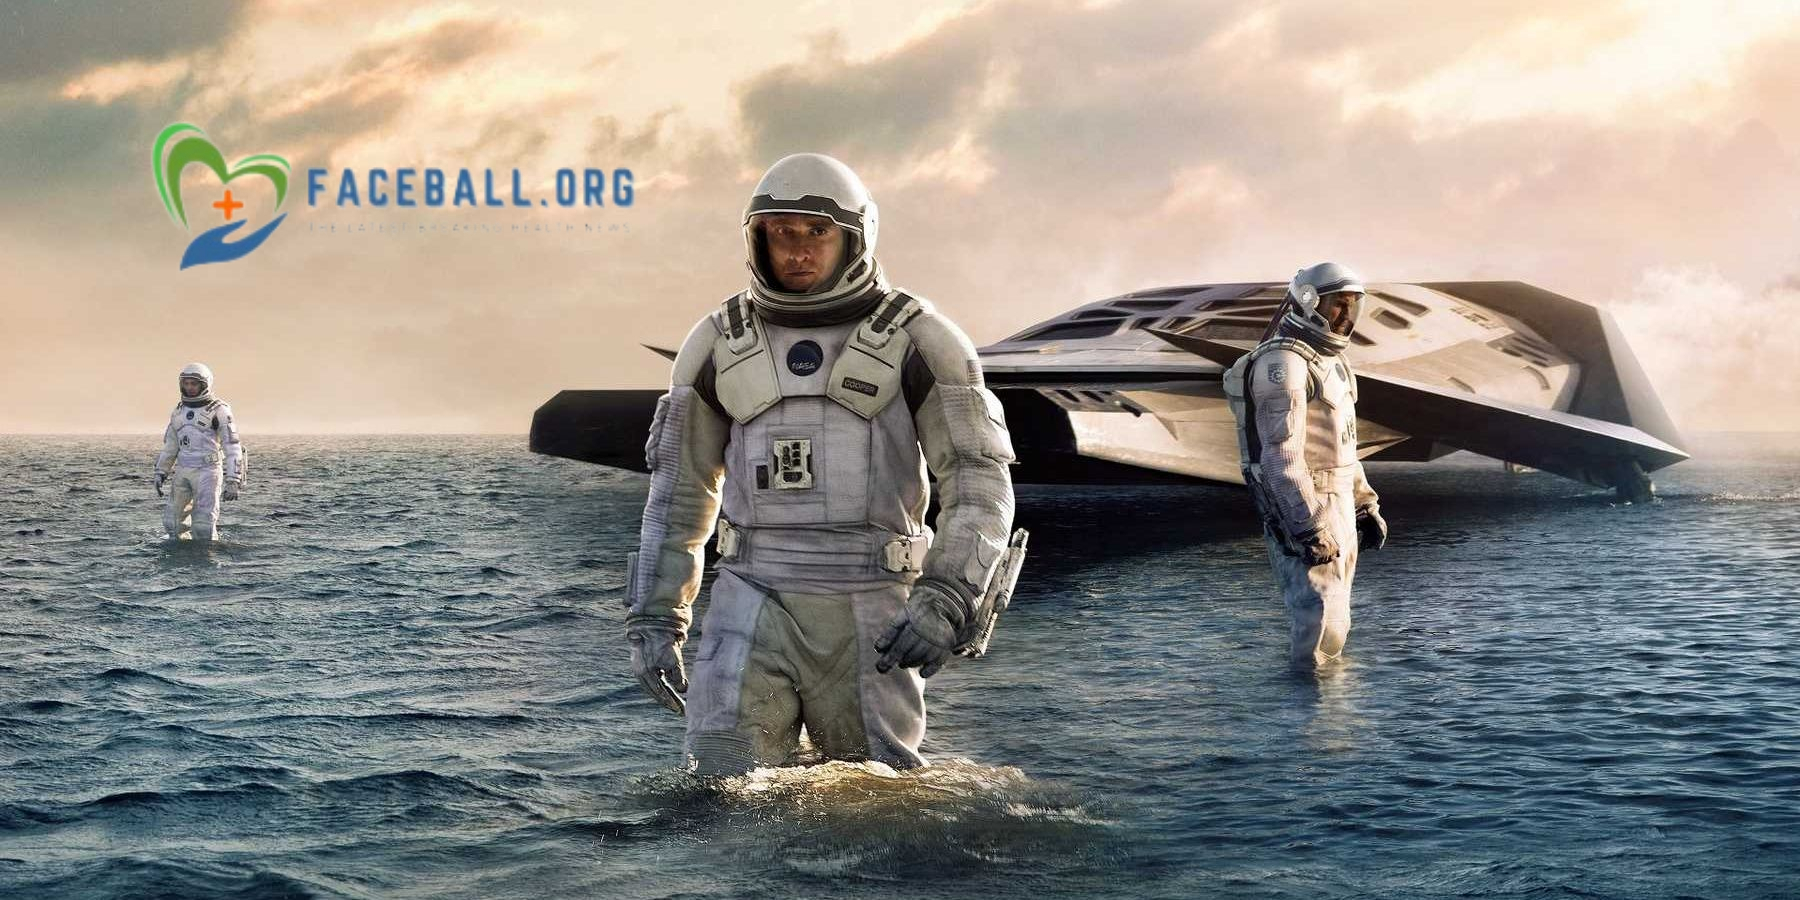 Interstellar 2 Release Date Here's What We Know So Far About